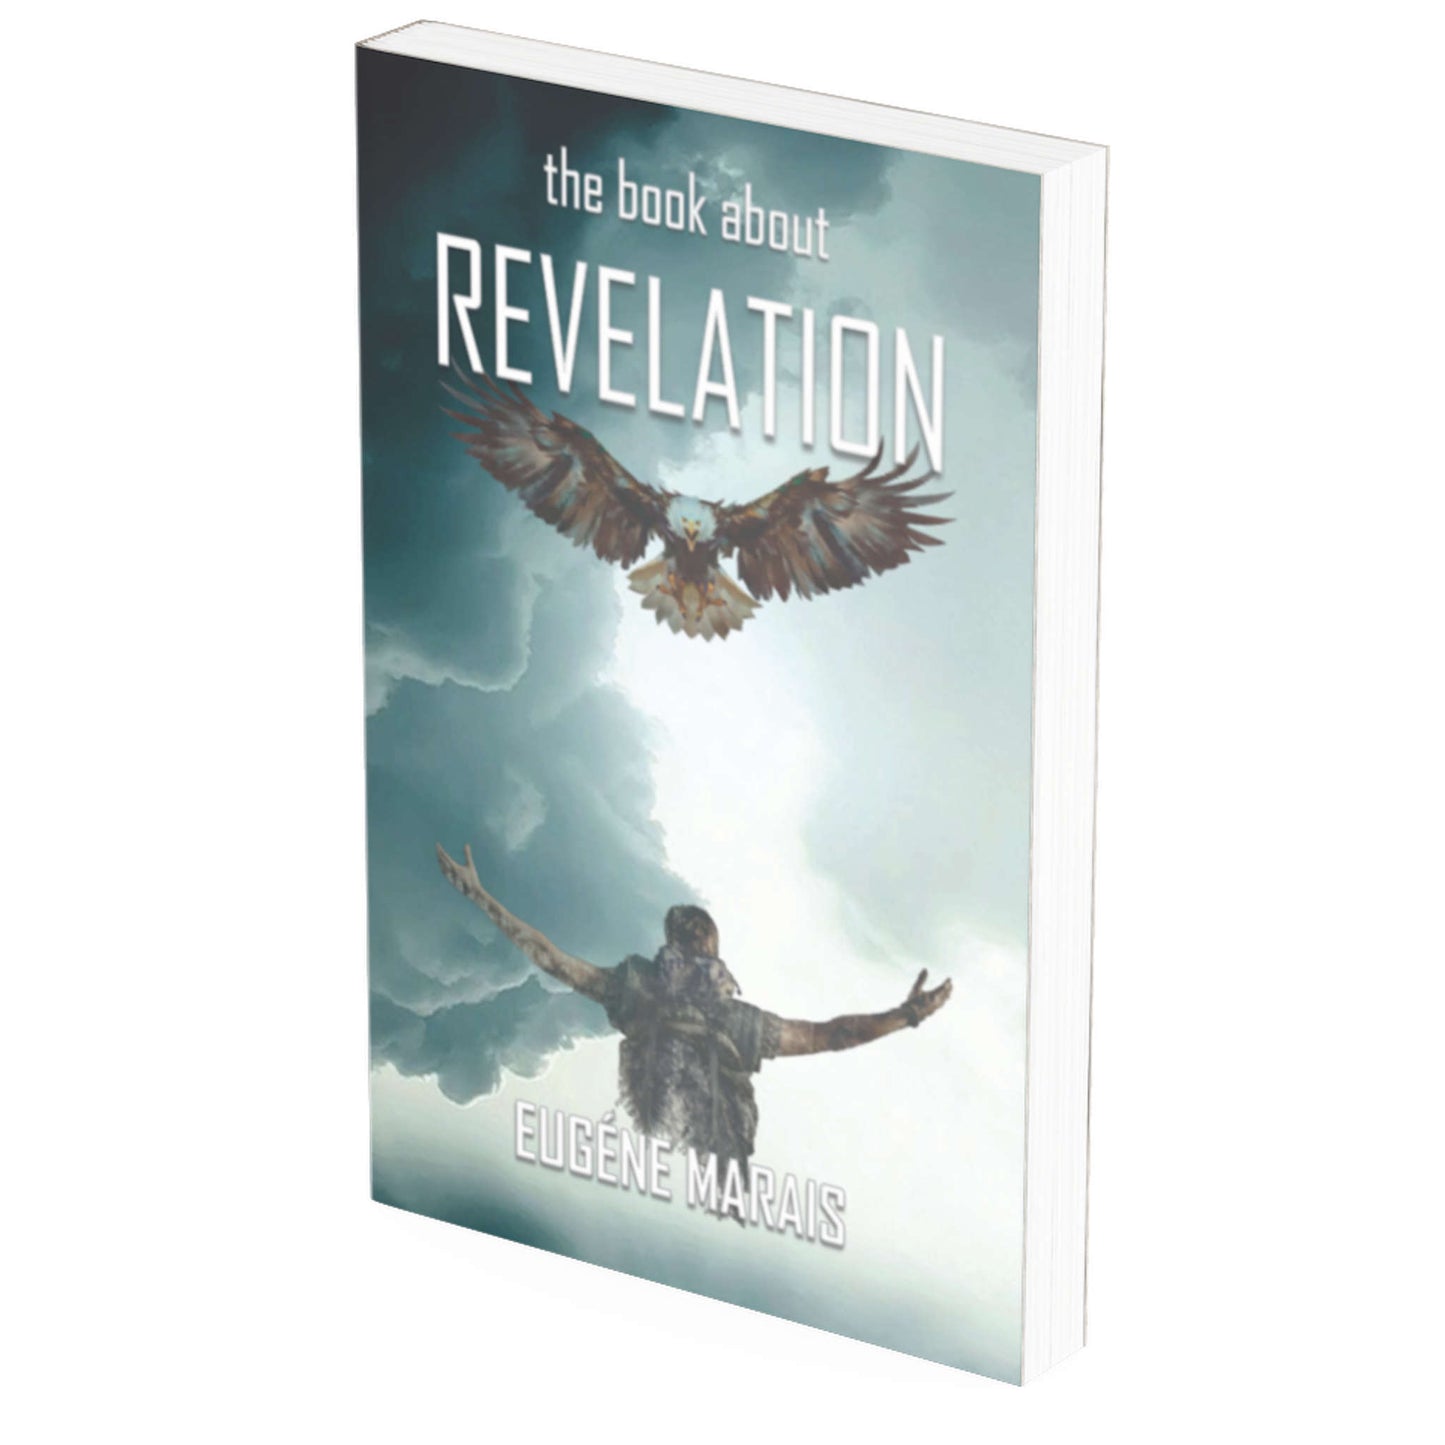 The Book about Revelation